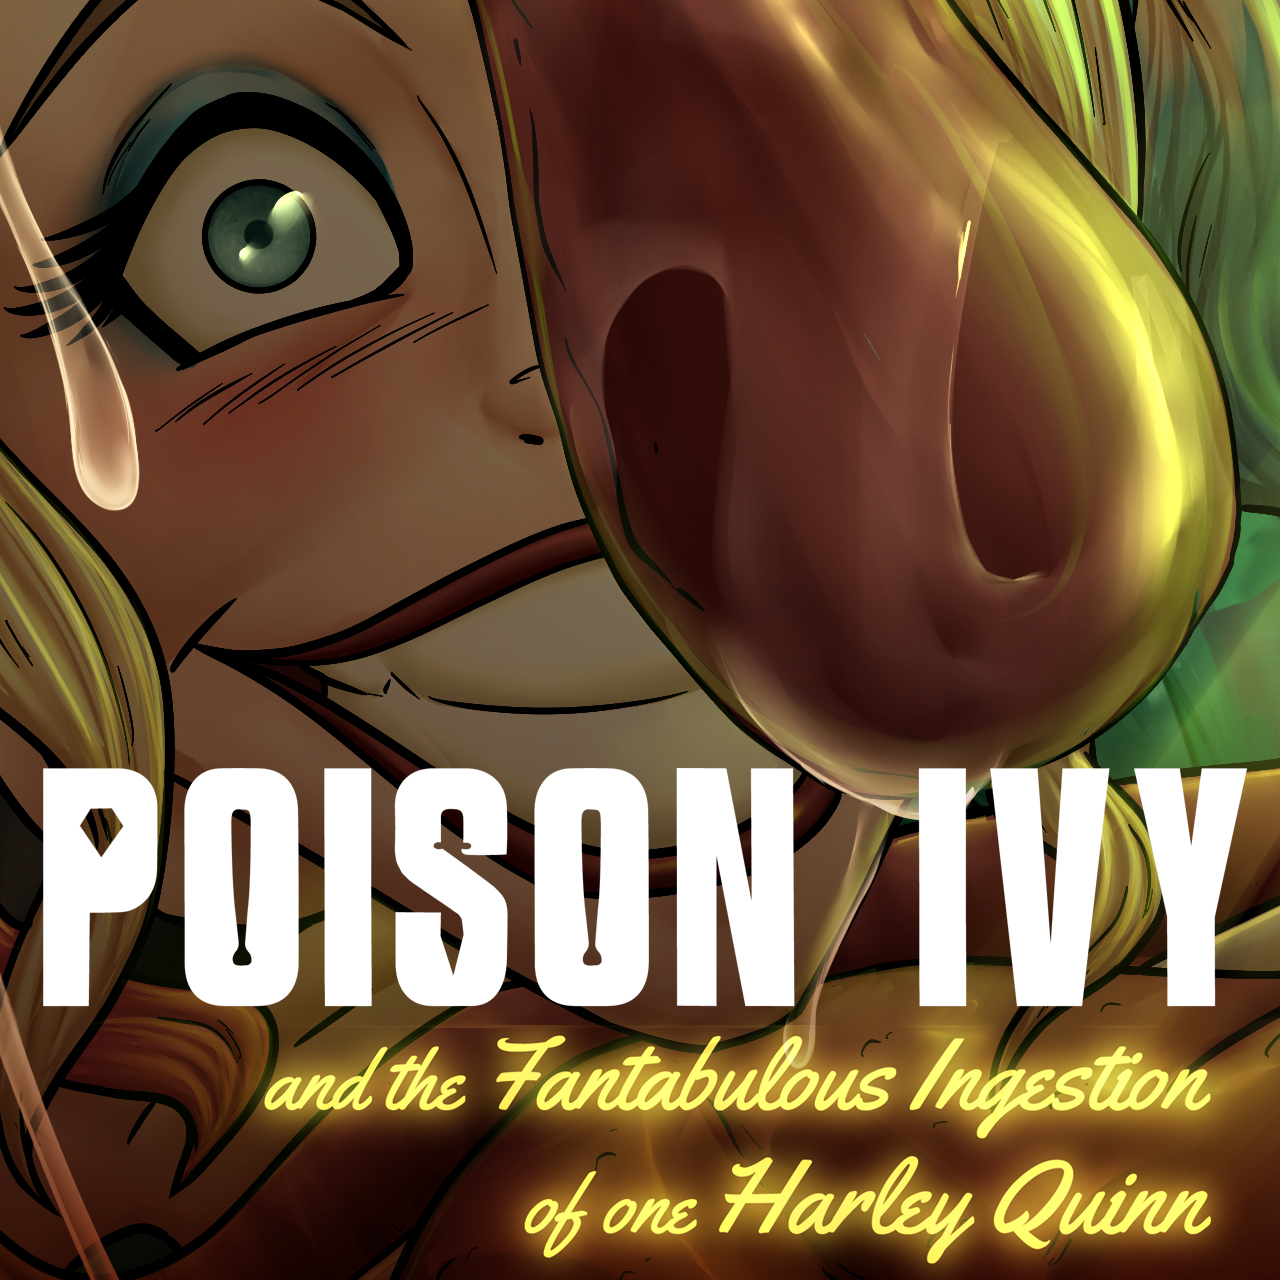 Poison Ivy and the Fantabulous Ingestion of One Harley Quinn